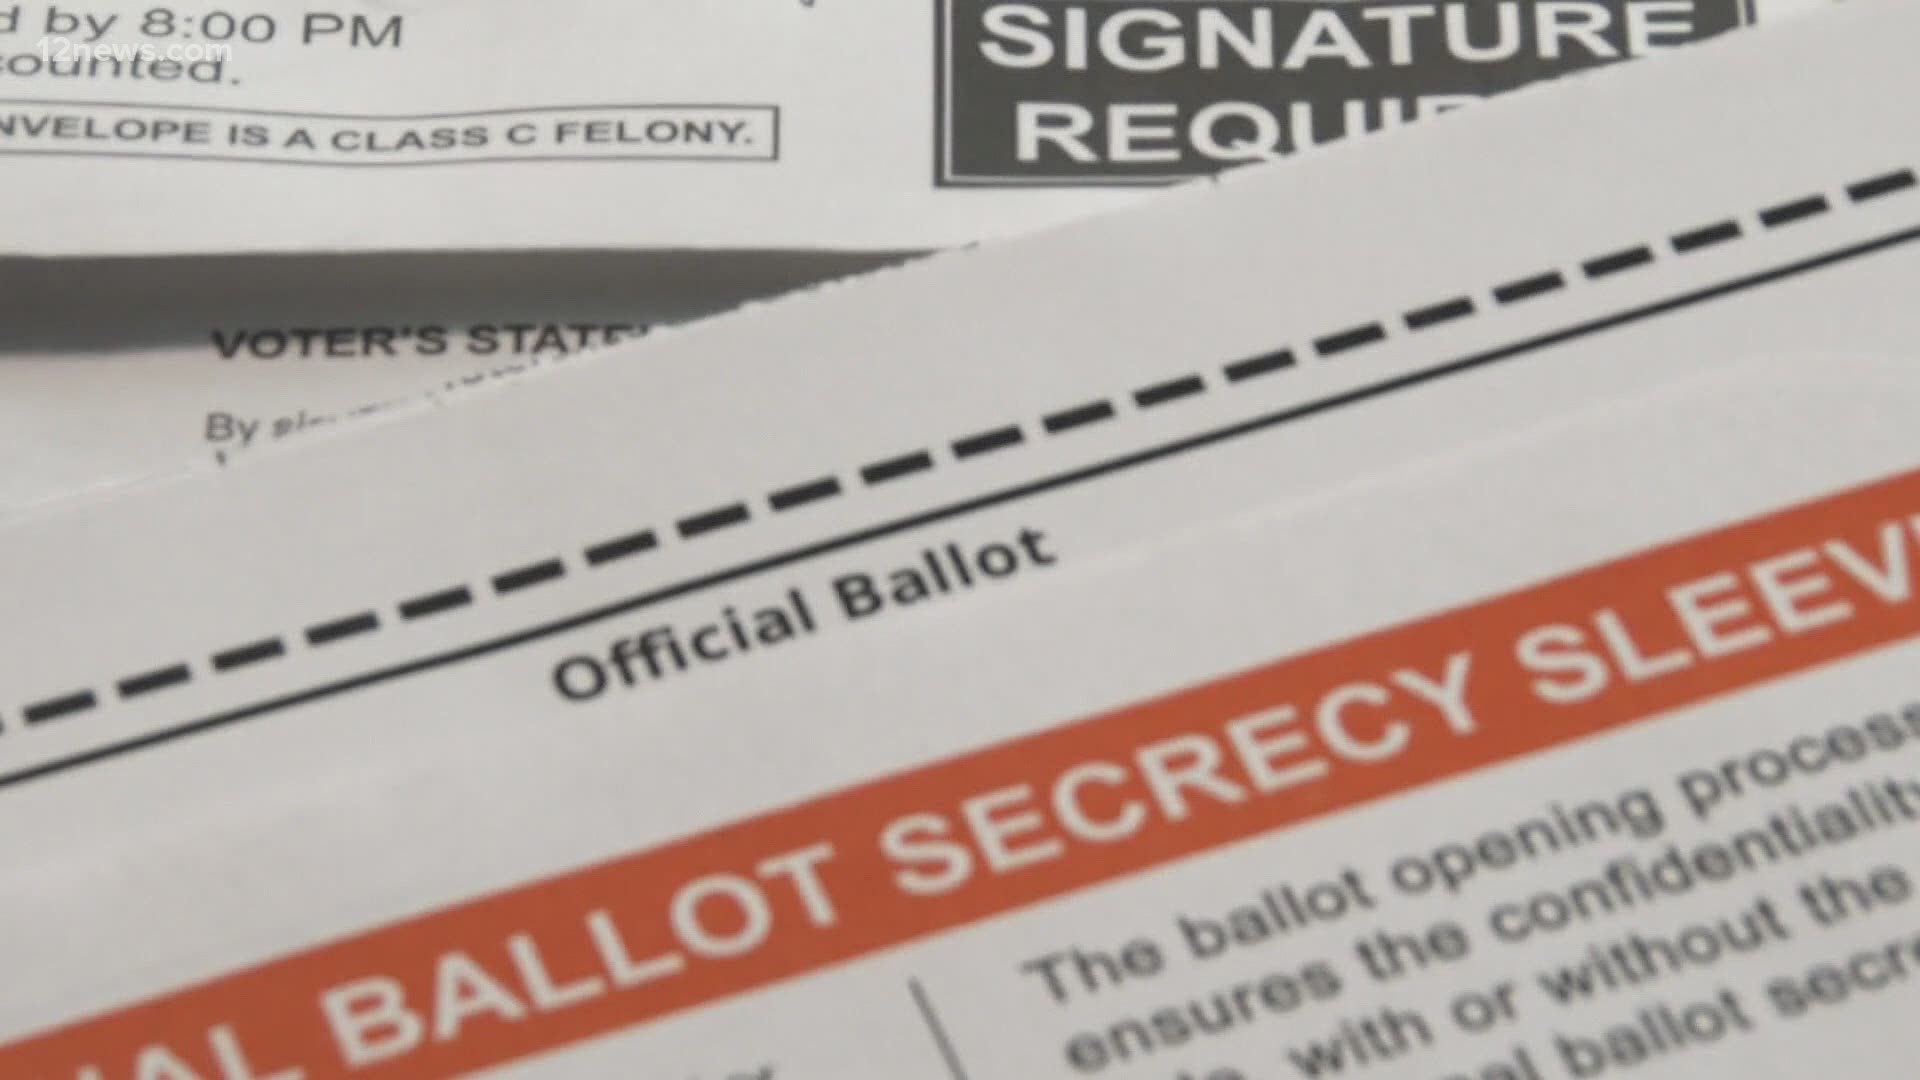 Voters should check their registration with Arizona before the October 5 deadline.